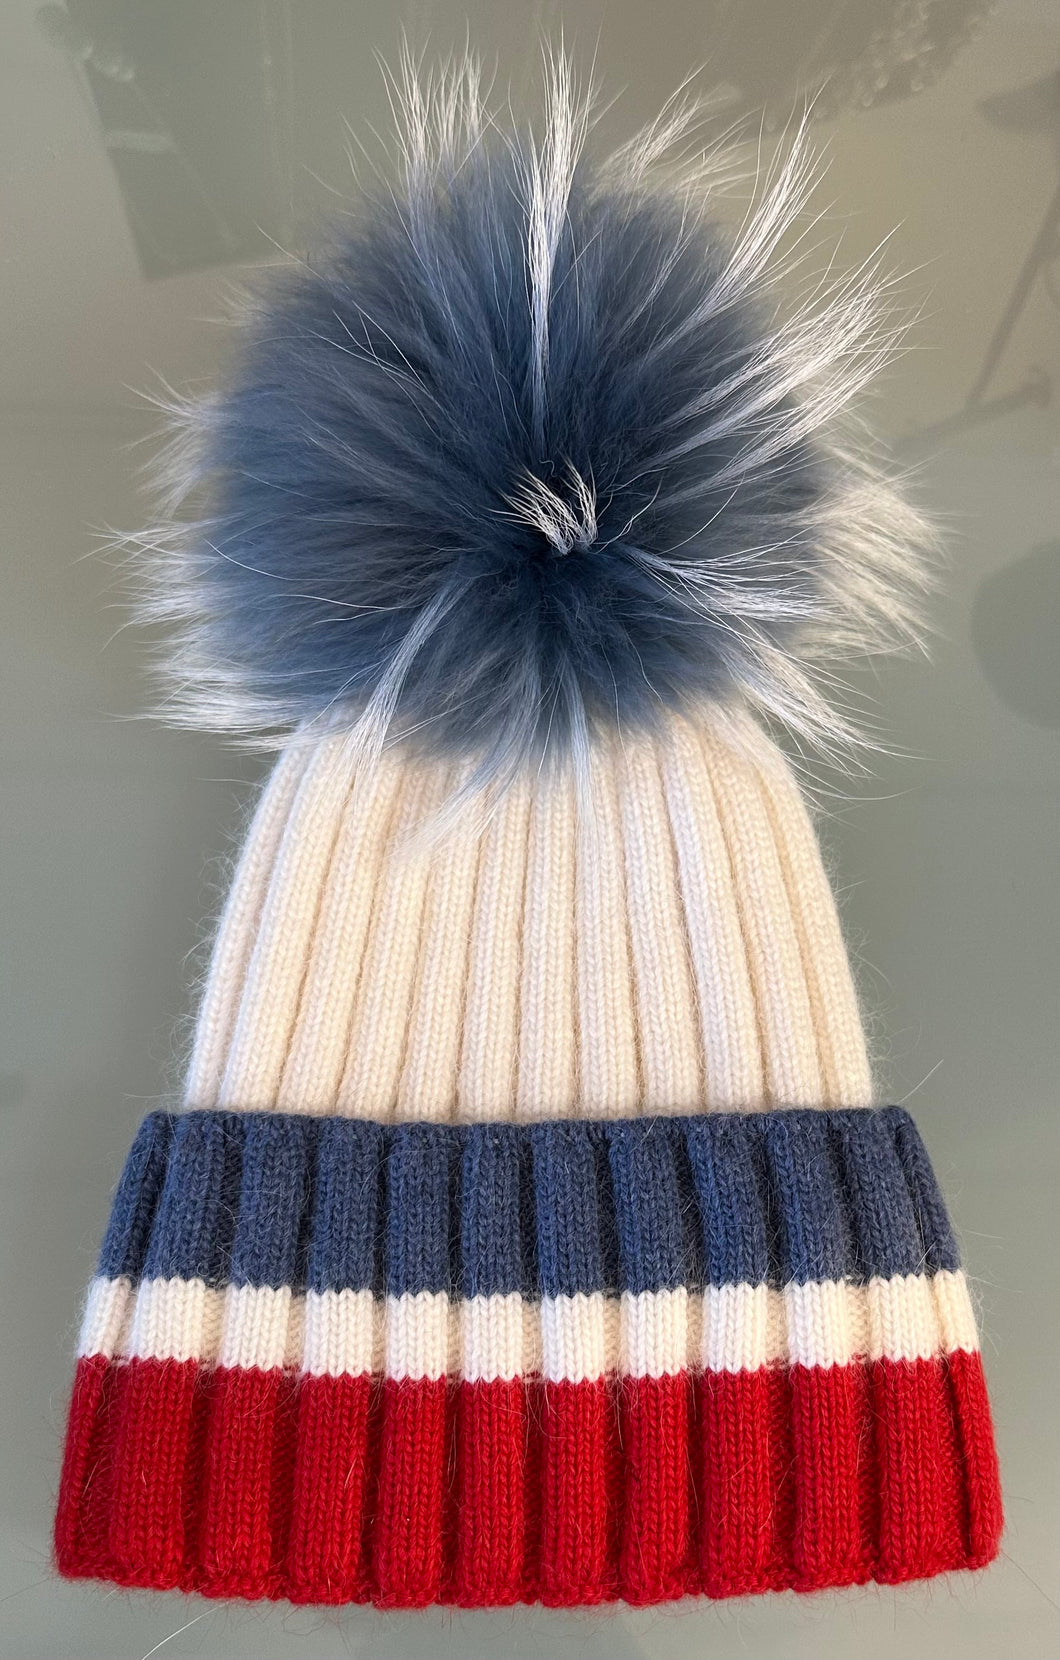 Linda Richards White, Red and Blue Striped Hat with Blue Fur Pom